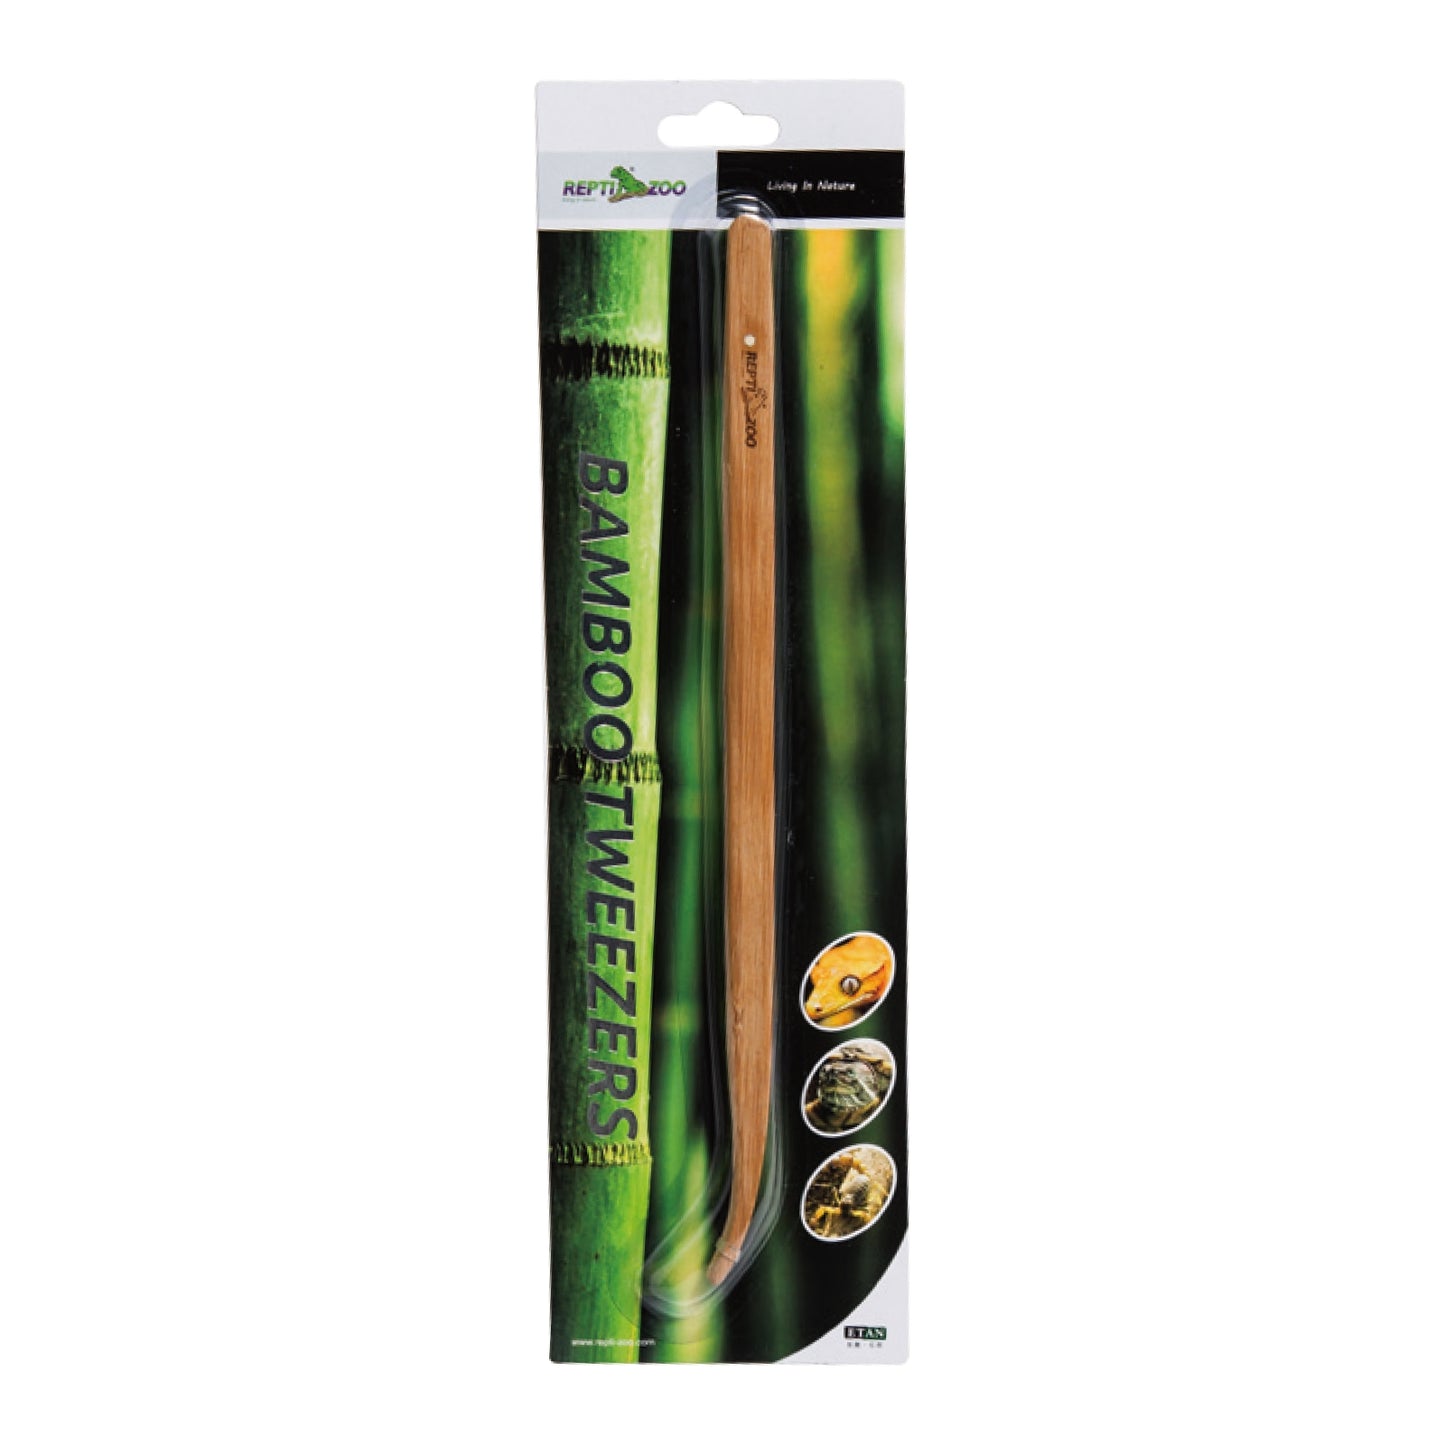 Livefood Stainless Bamboo Tweezers Curve 280mm (11")